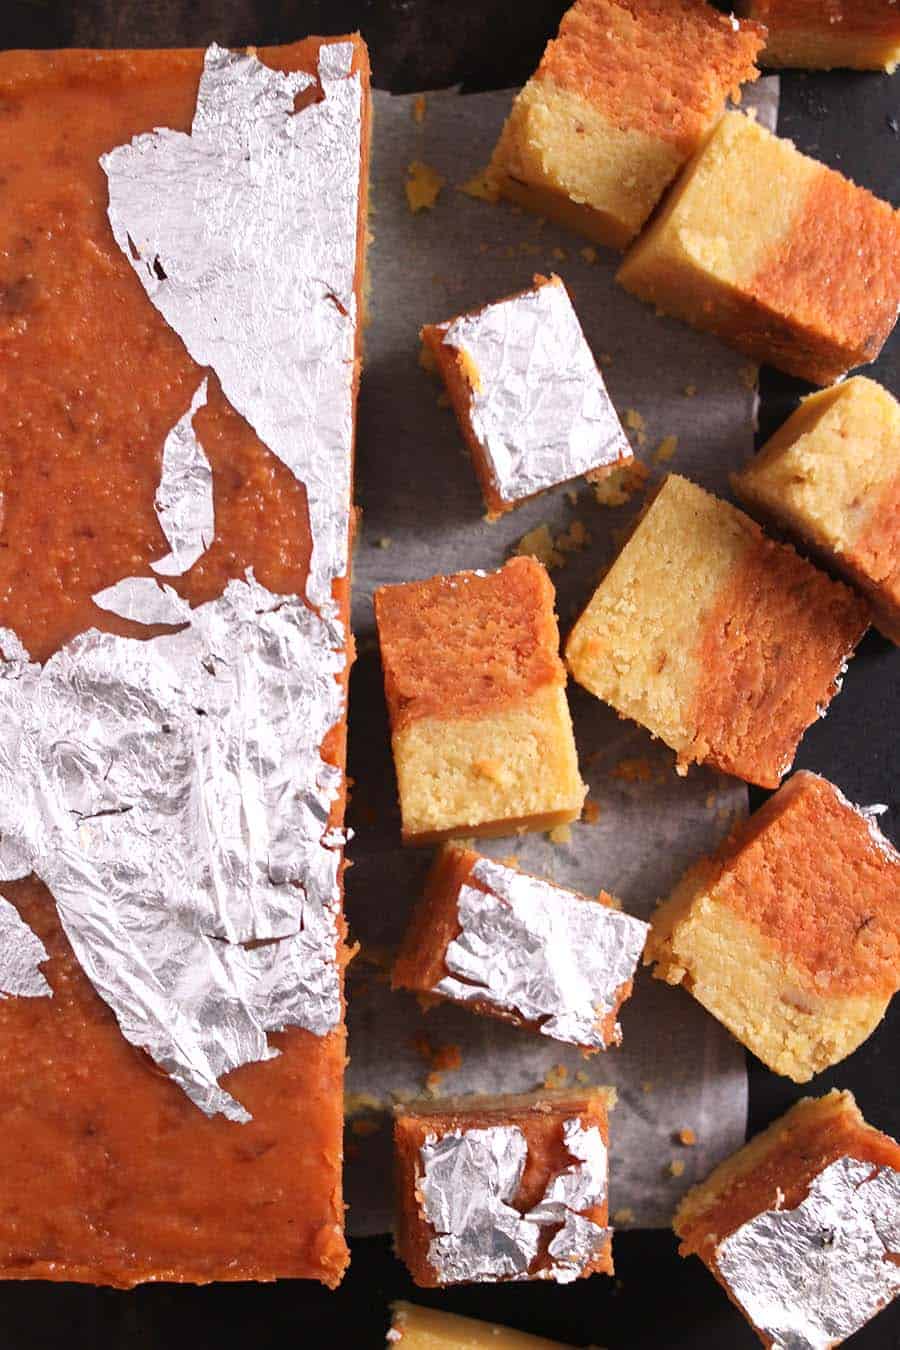 Gulkand Khoya Barfi is a classic and rich, aromatic, and melt-in-mouth Indian no-bake fudge recipe prepared using just 4 ingredients.